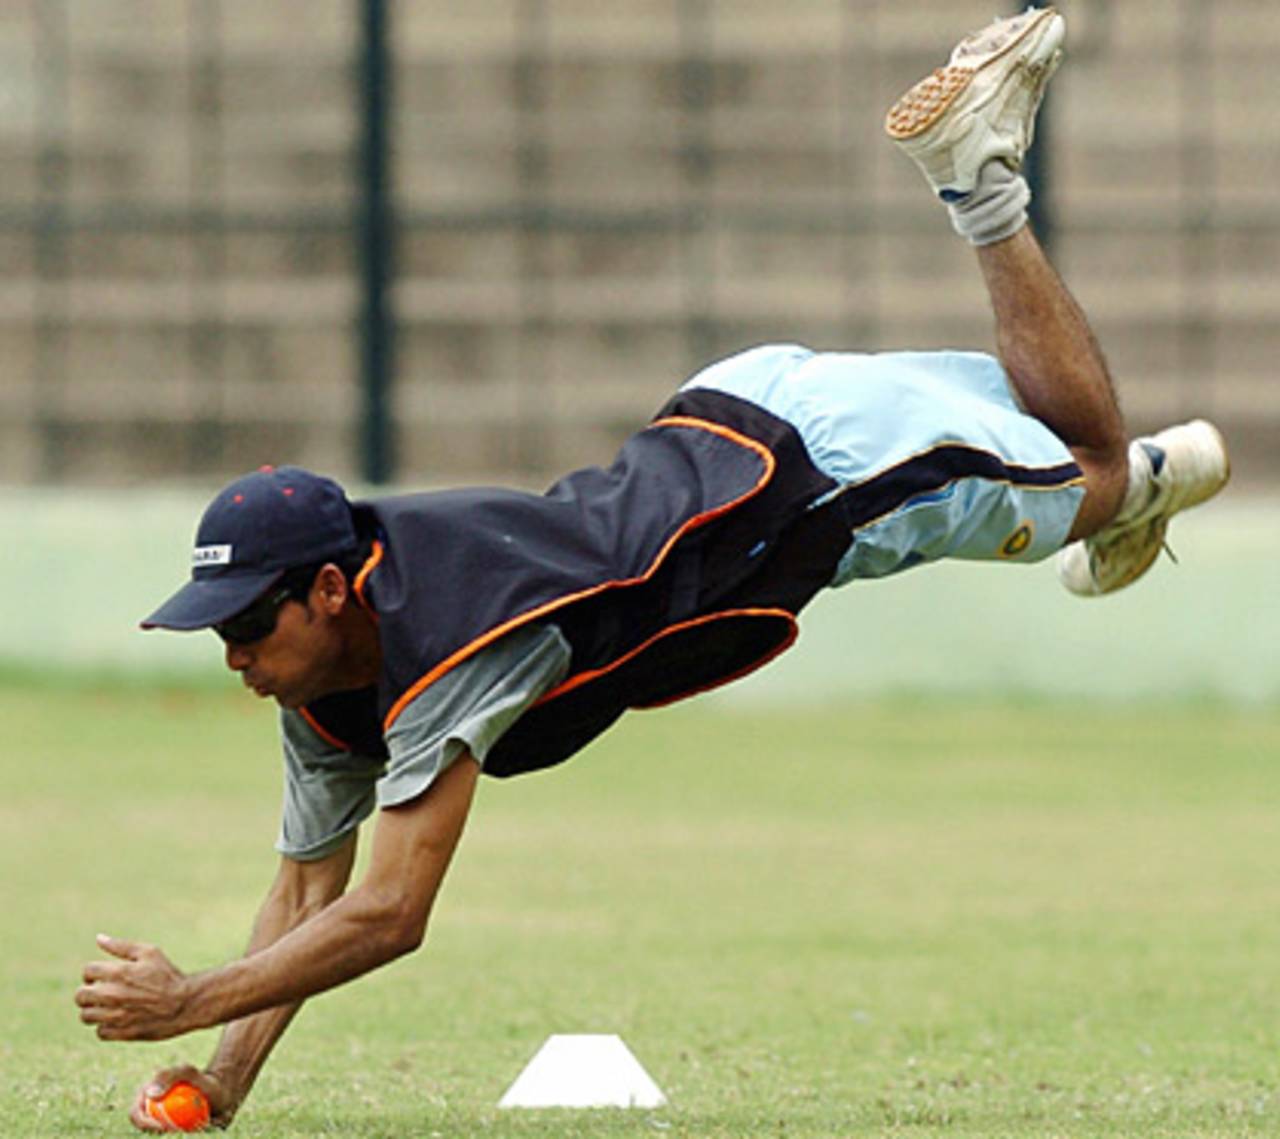 Mohammad Kaif dives to catch a ball in a training session, July 8, 2005